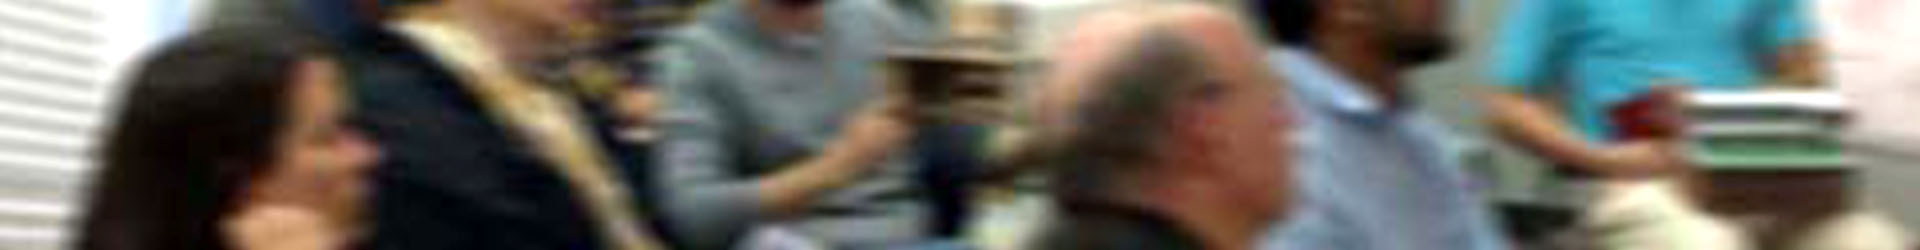 blurred banner photo of people looking to the right